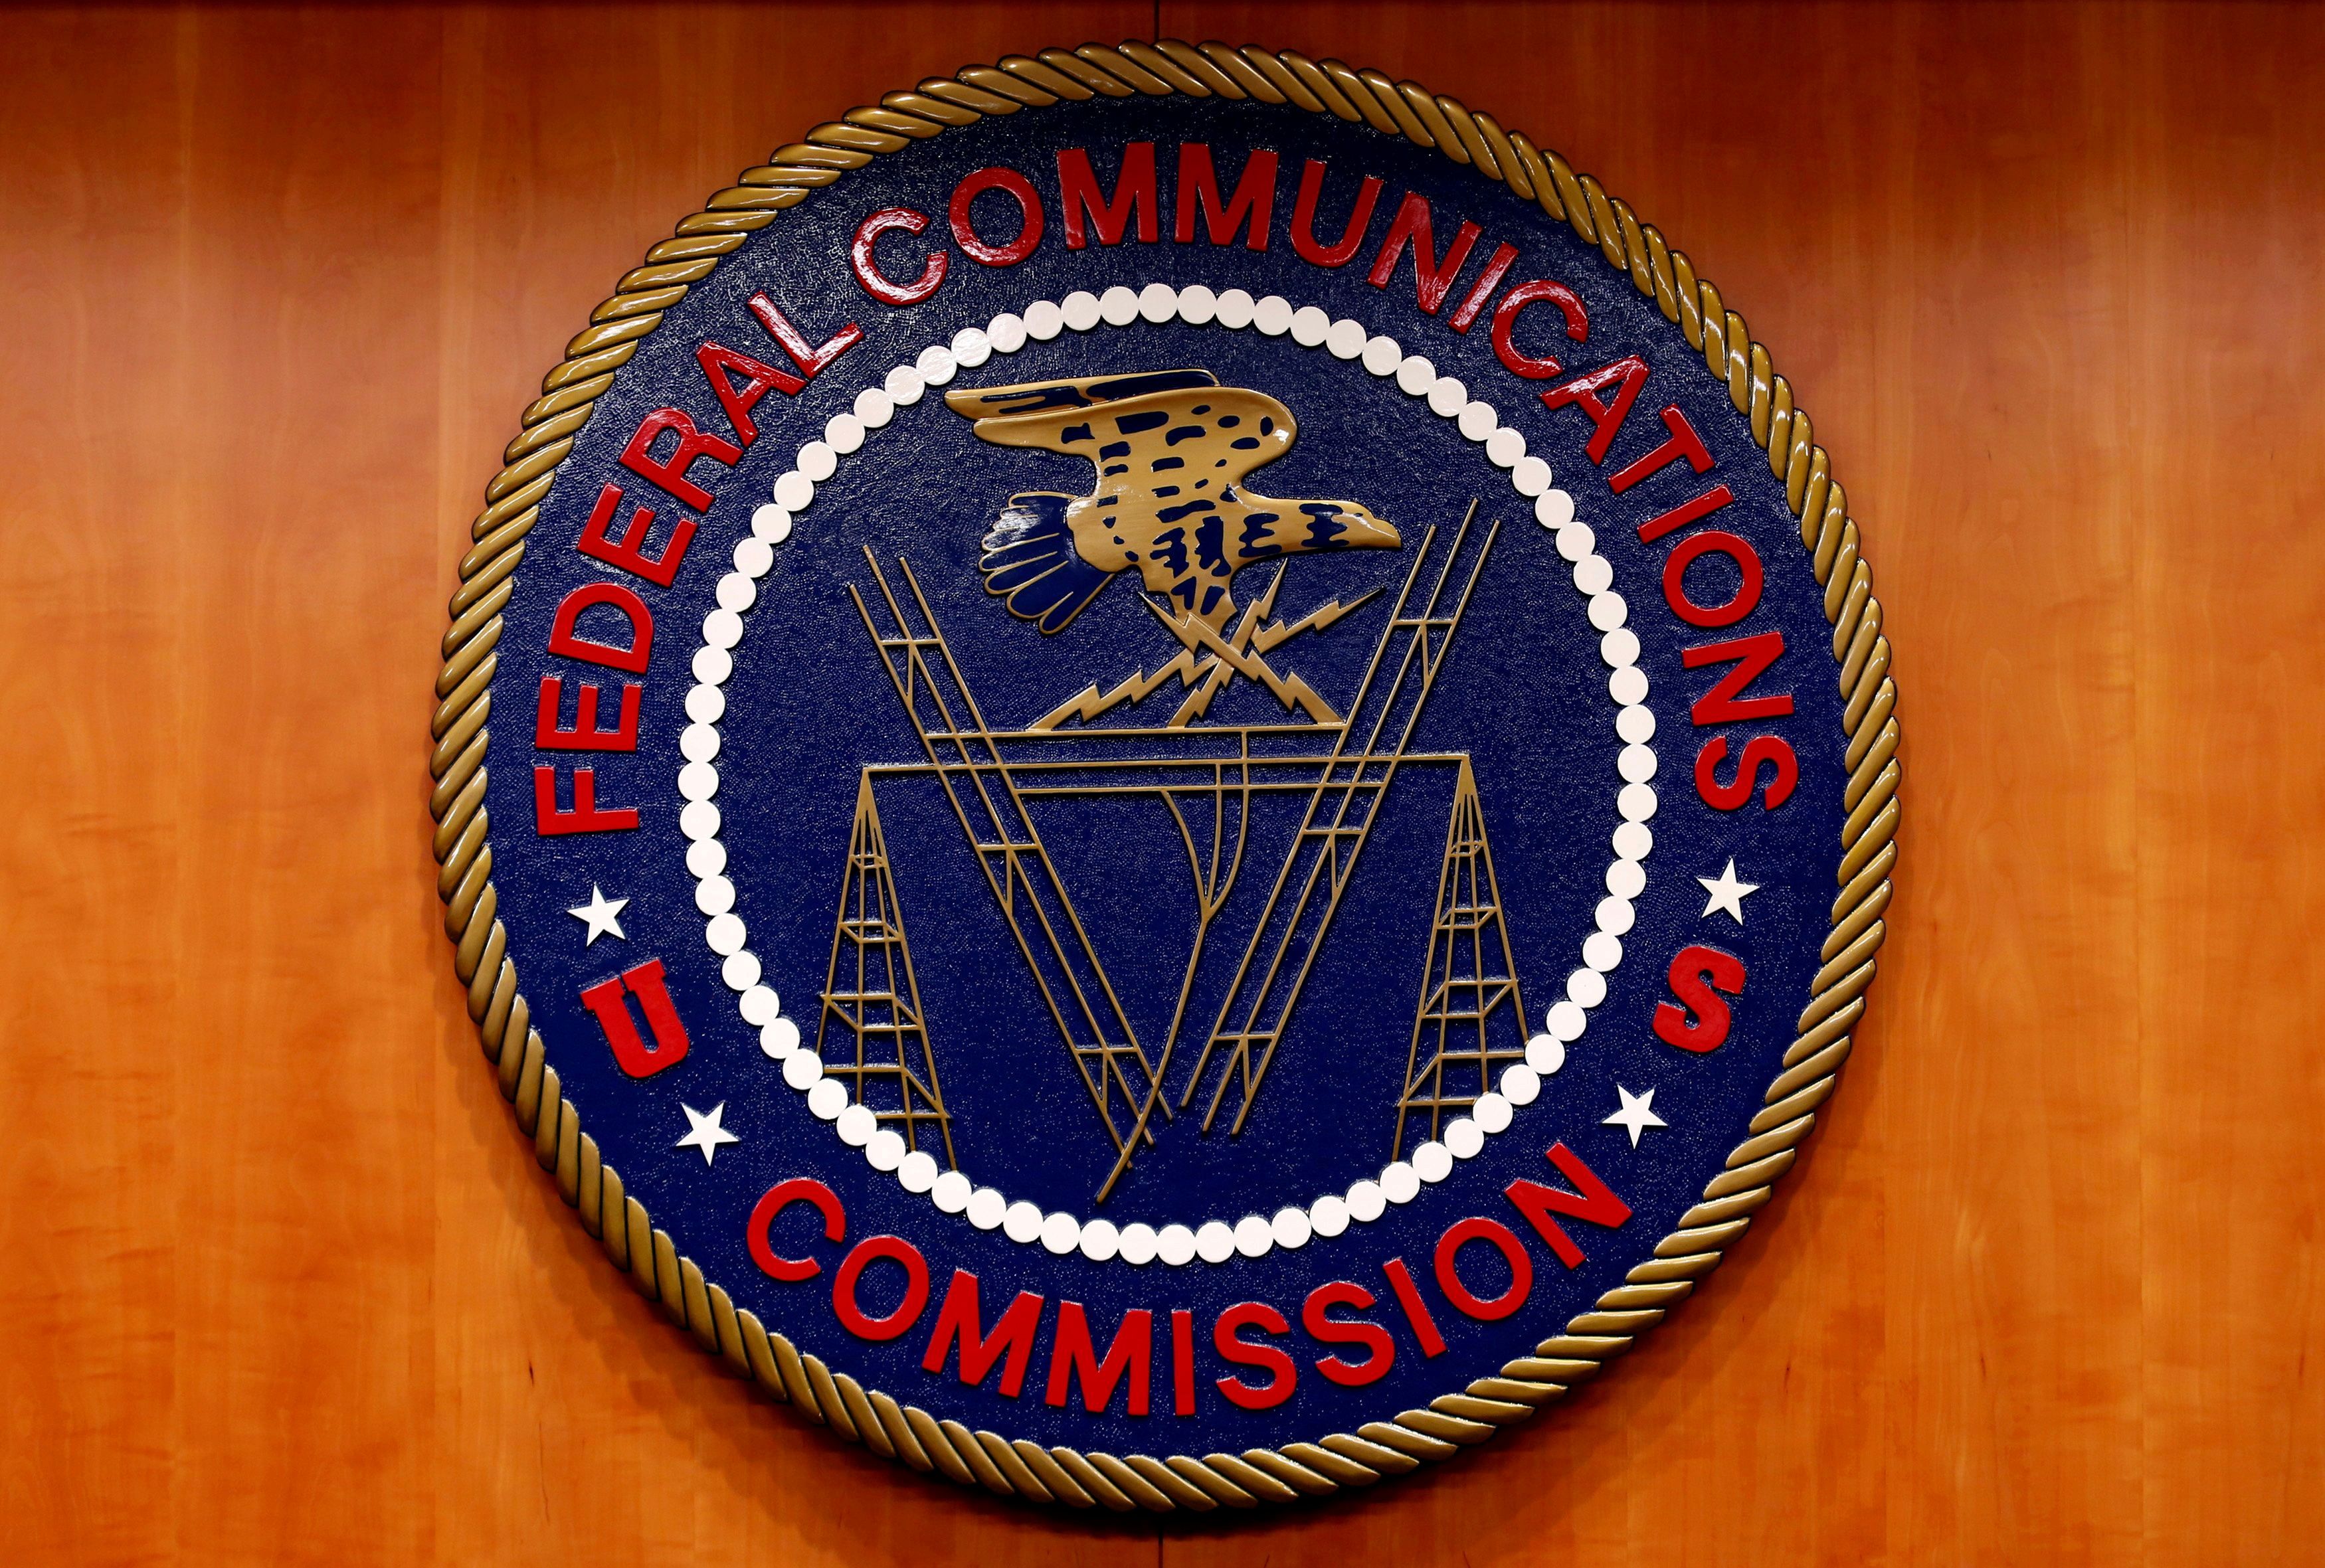 The Federal Communications Commission (FCC) logo is seen in Washington February 26, 2015. REUTERS/Yuri Gripas